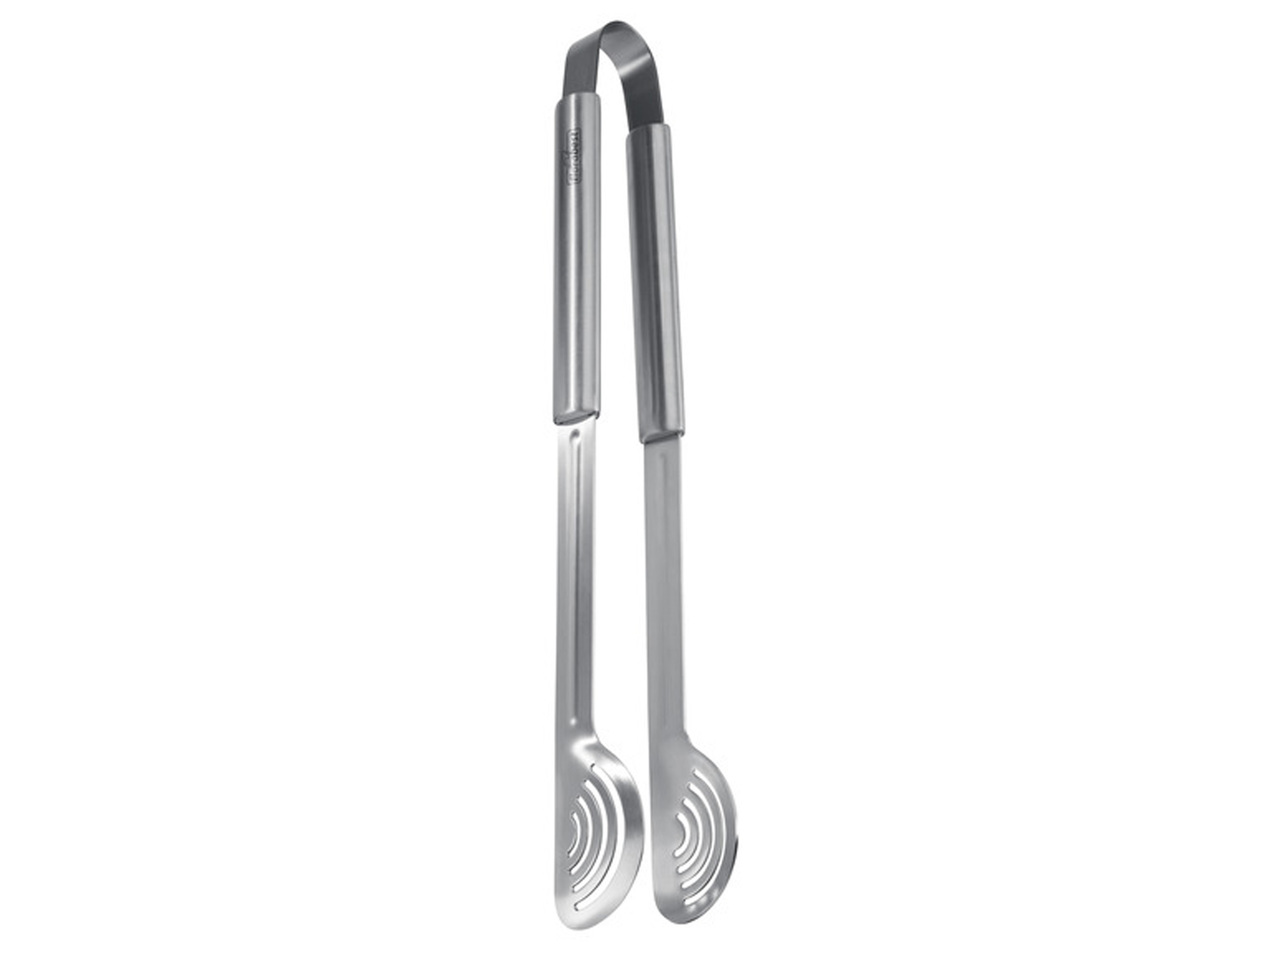 FLORABEST Stainless Steel Barbecue Tools